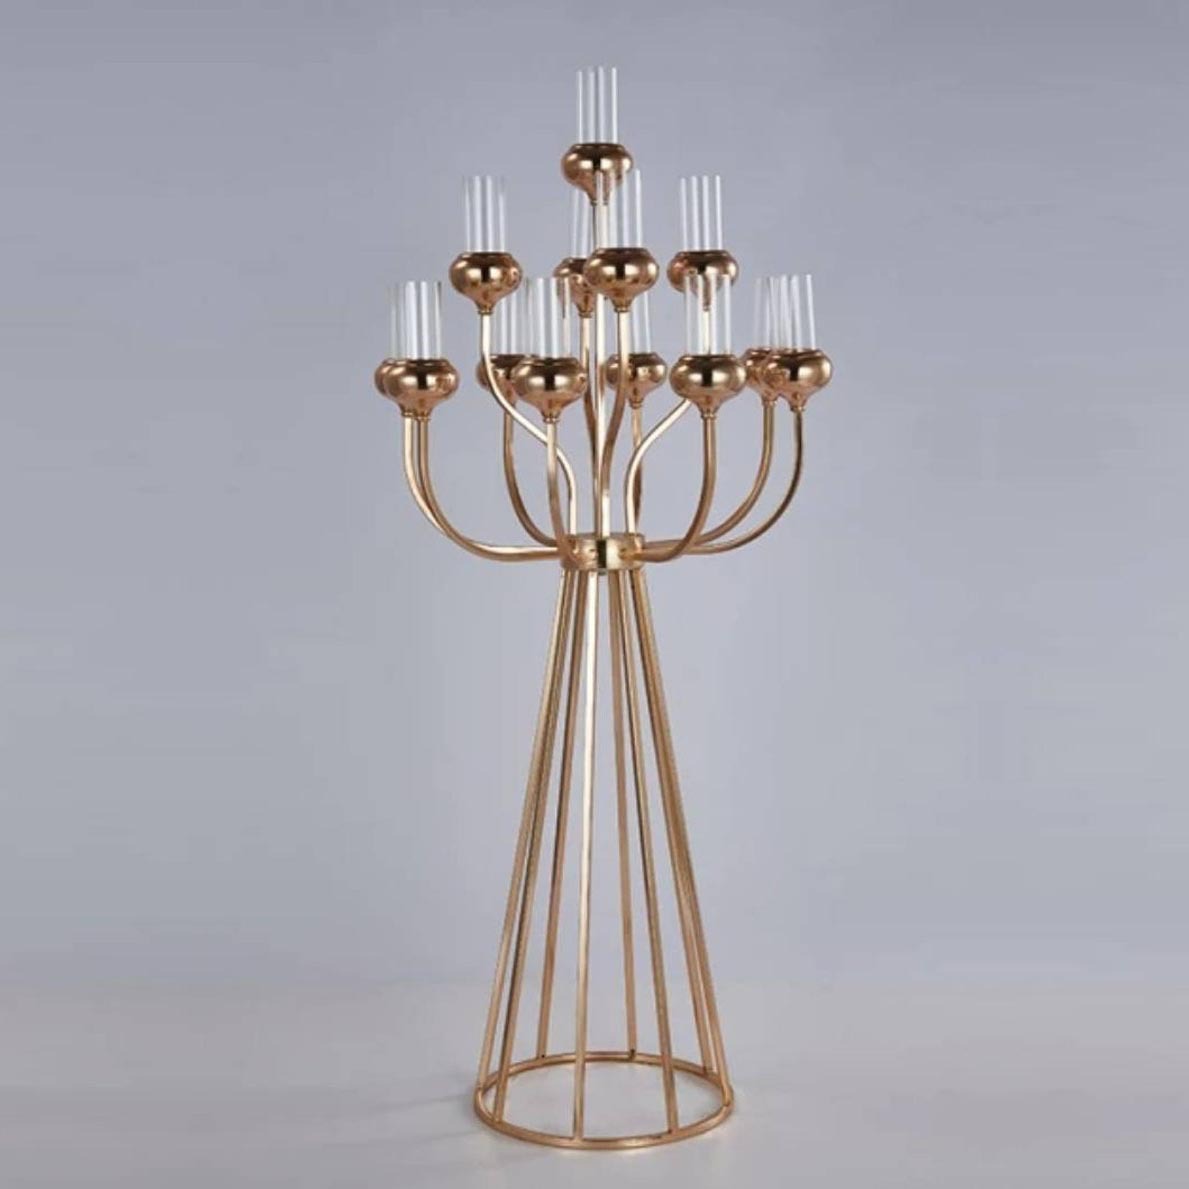 Metal Candelabra for Home Party Decoration, Candle Holders, Stands, Wedding Table Centerpieces, Road Lead, Christmas